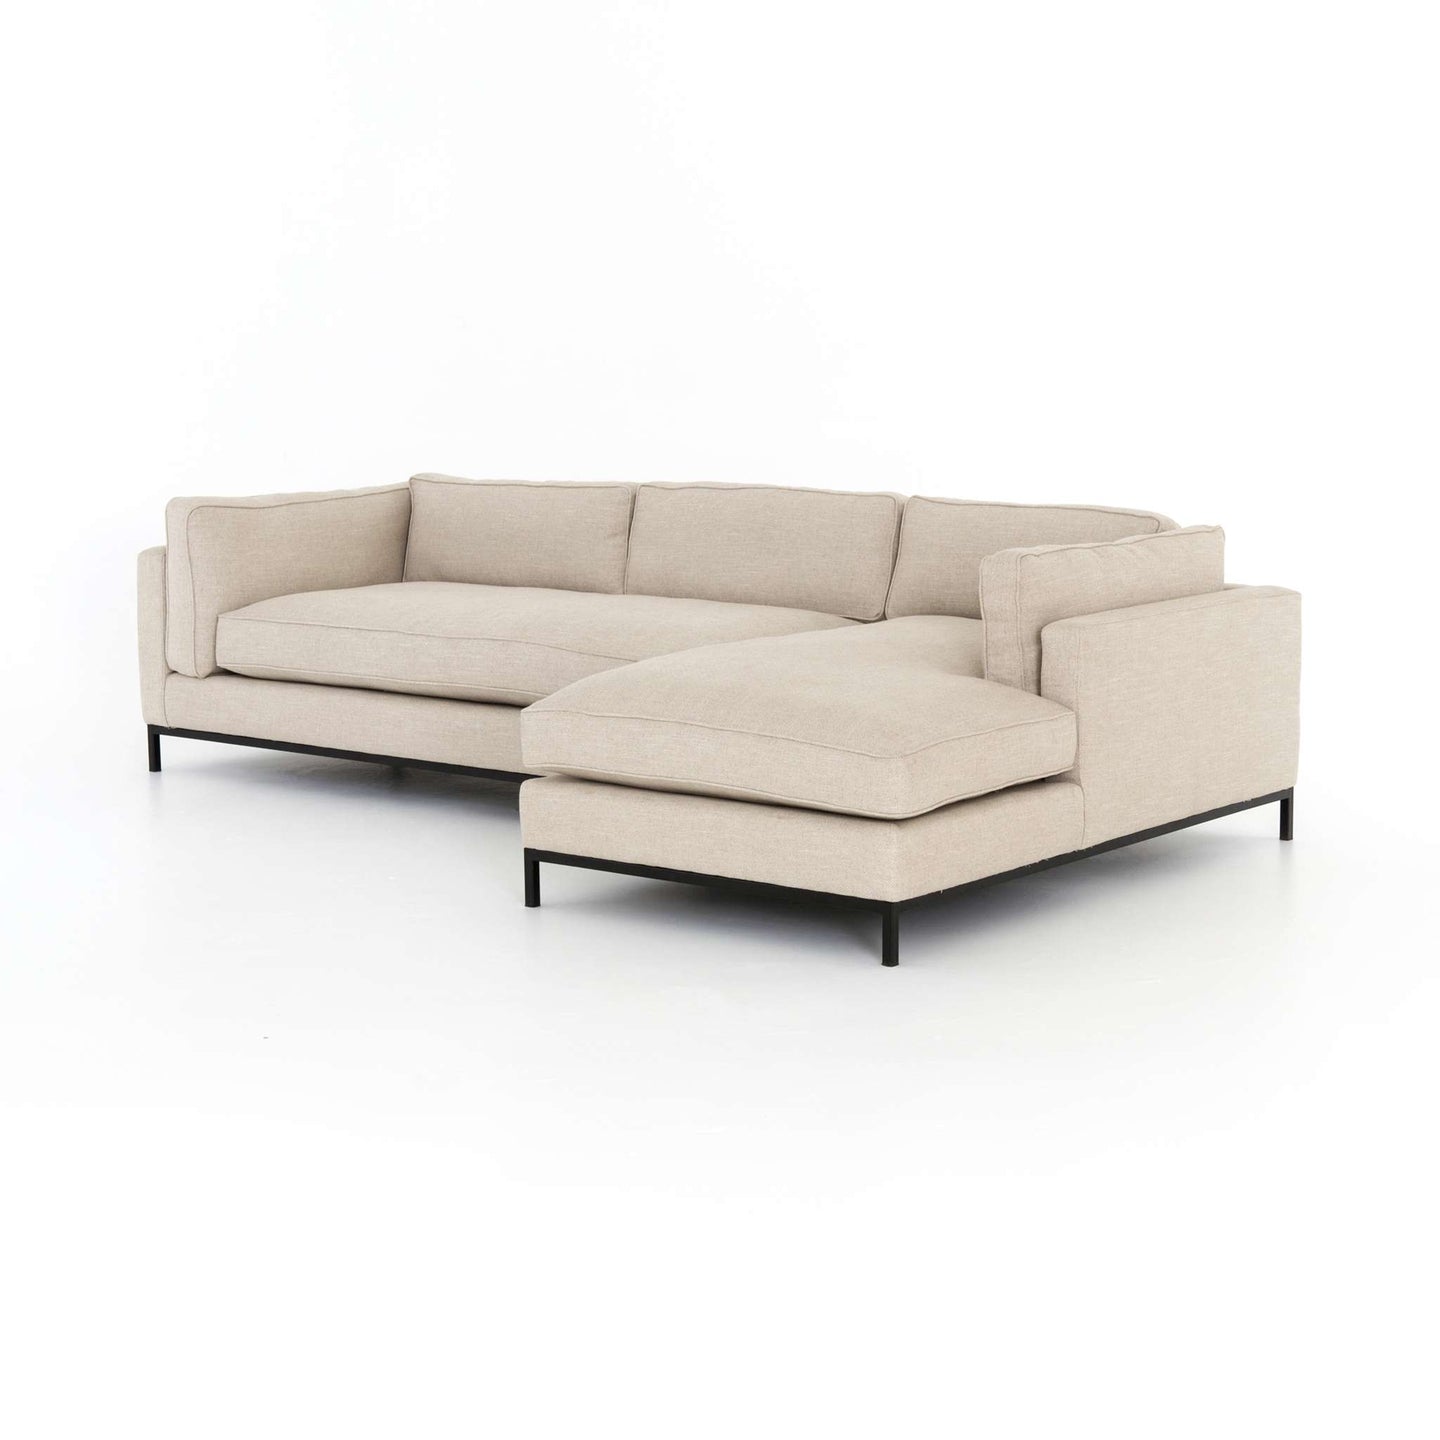 Grammercy 2 Pc Sectional W/ Raf Chaise